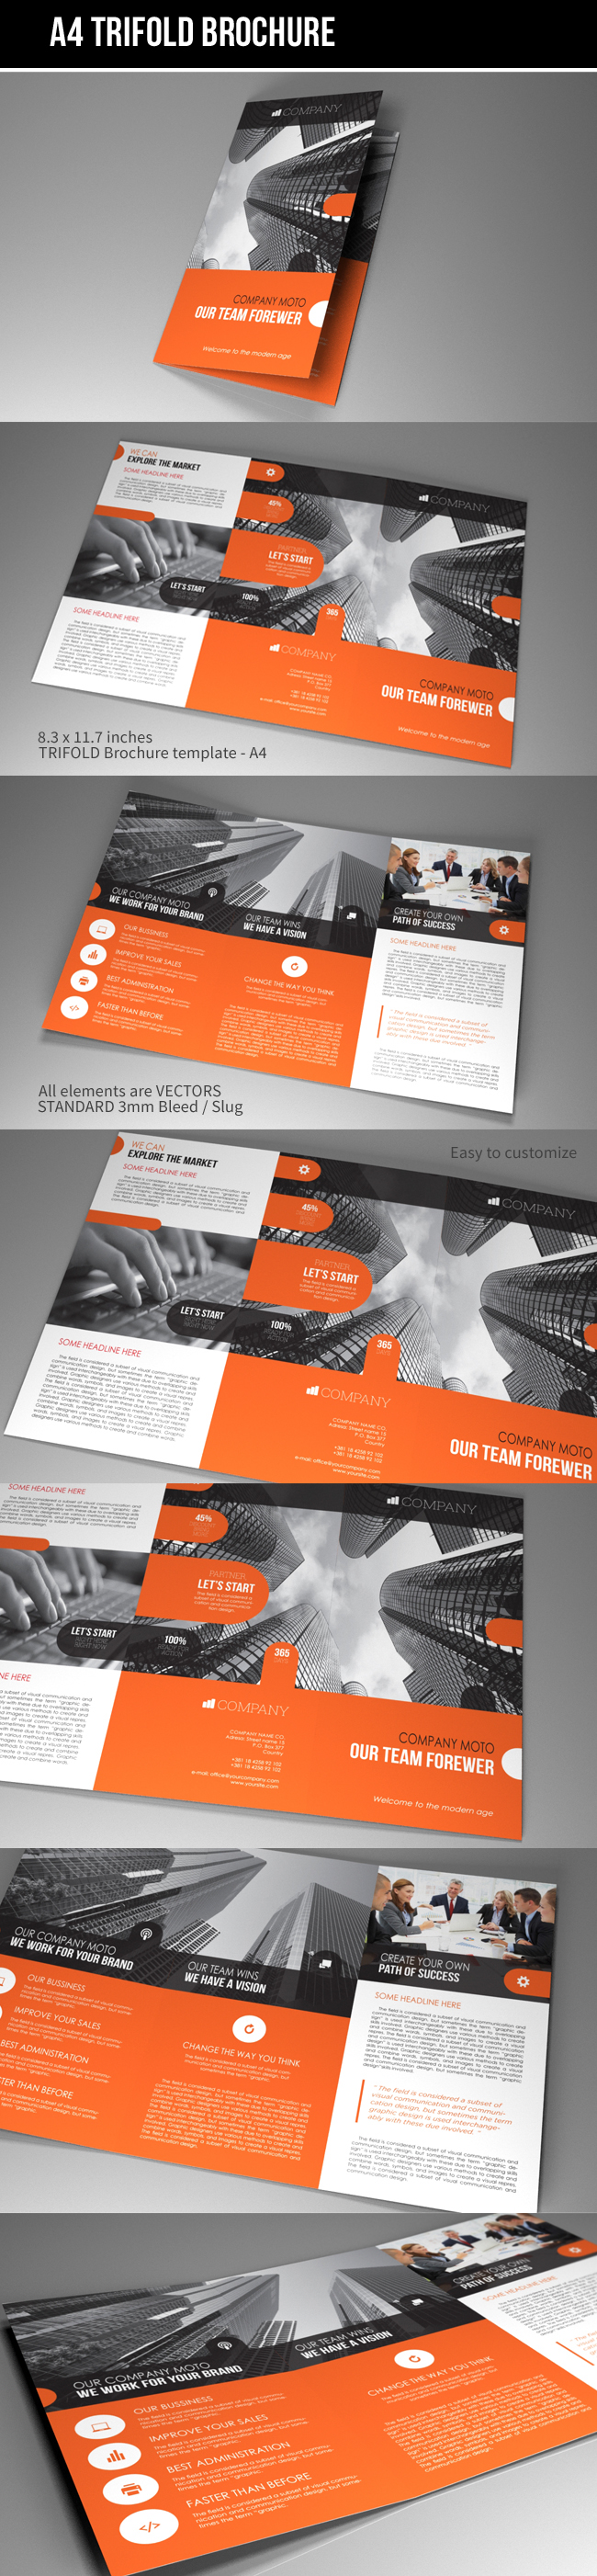 indesign template indesign brochure indd corporate bussiness people city rounded red black fancy icons trifold brochure brochure typing modern